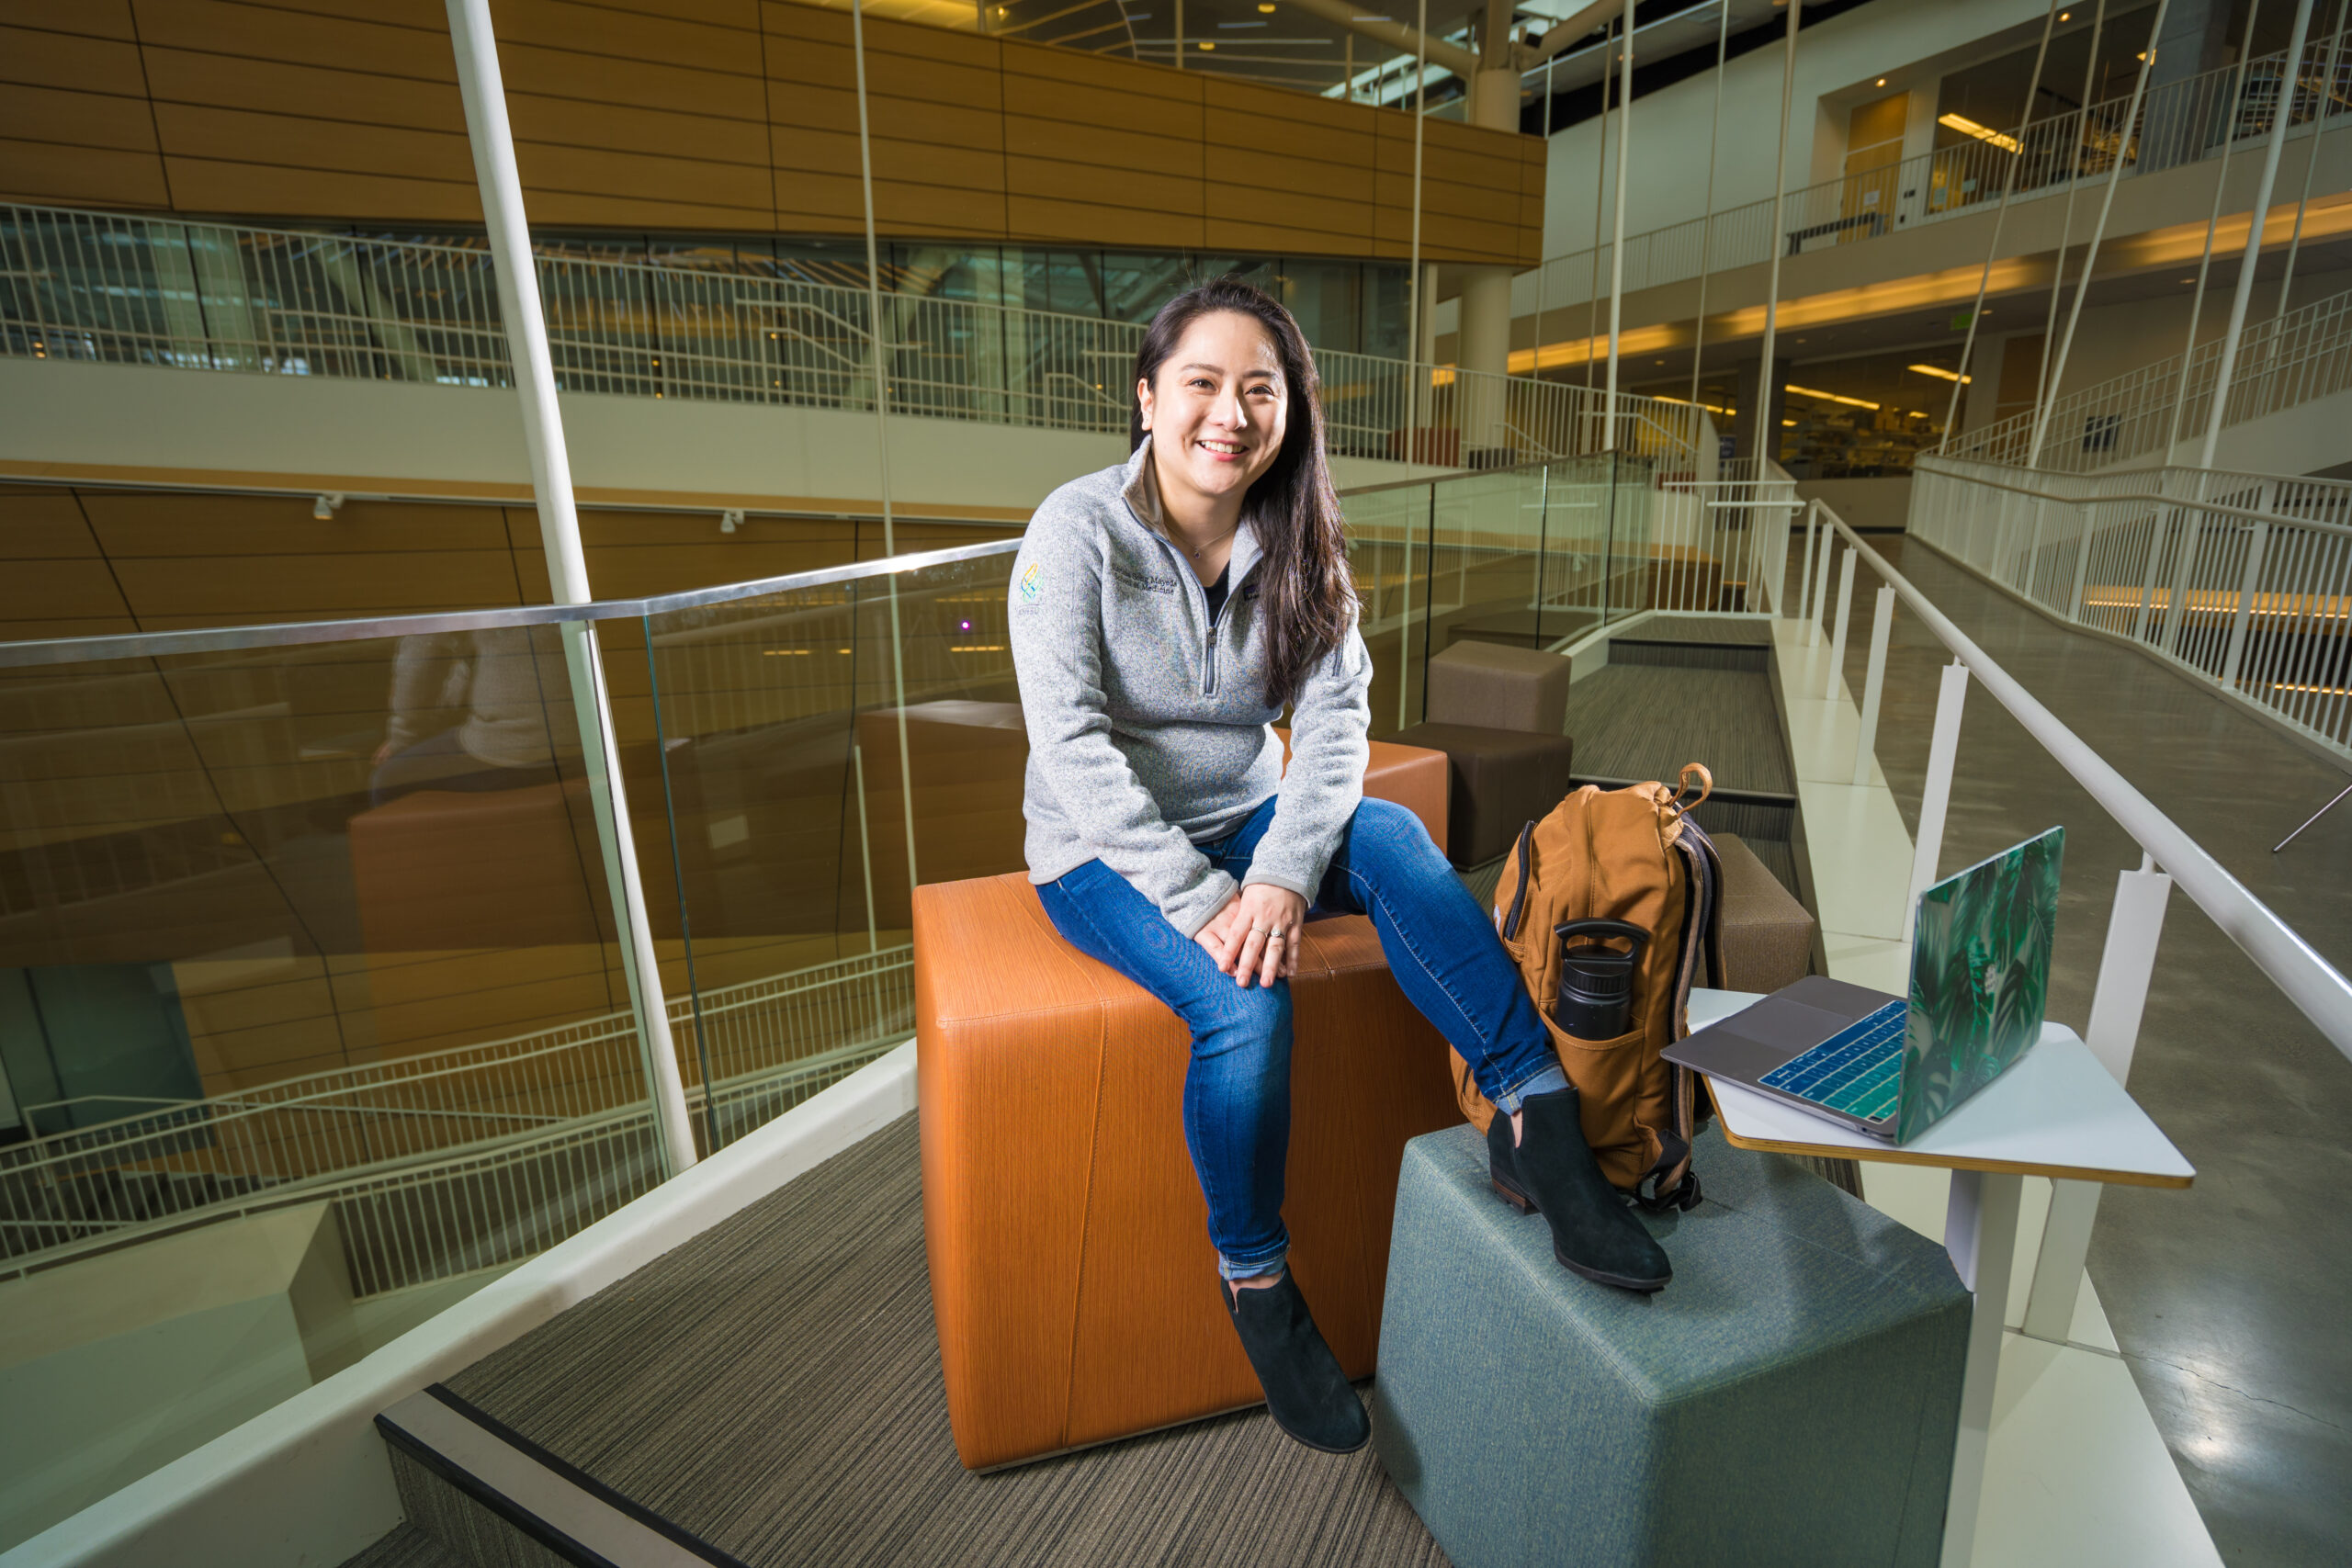 Smiling young woman sits in the Robertson Life Sciences Building with her foot propped up